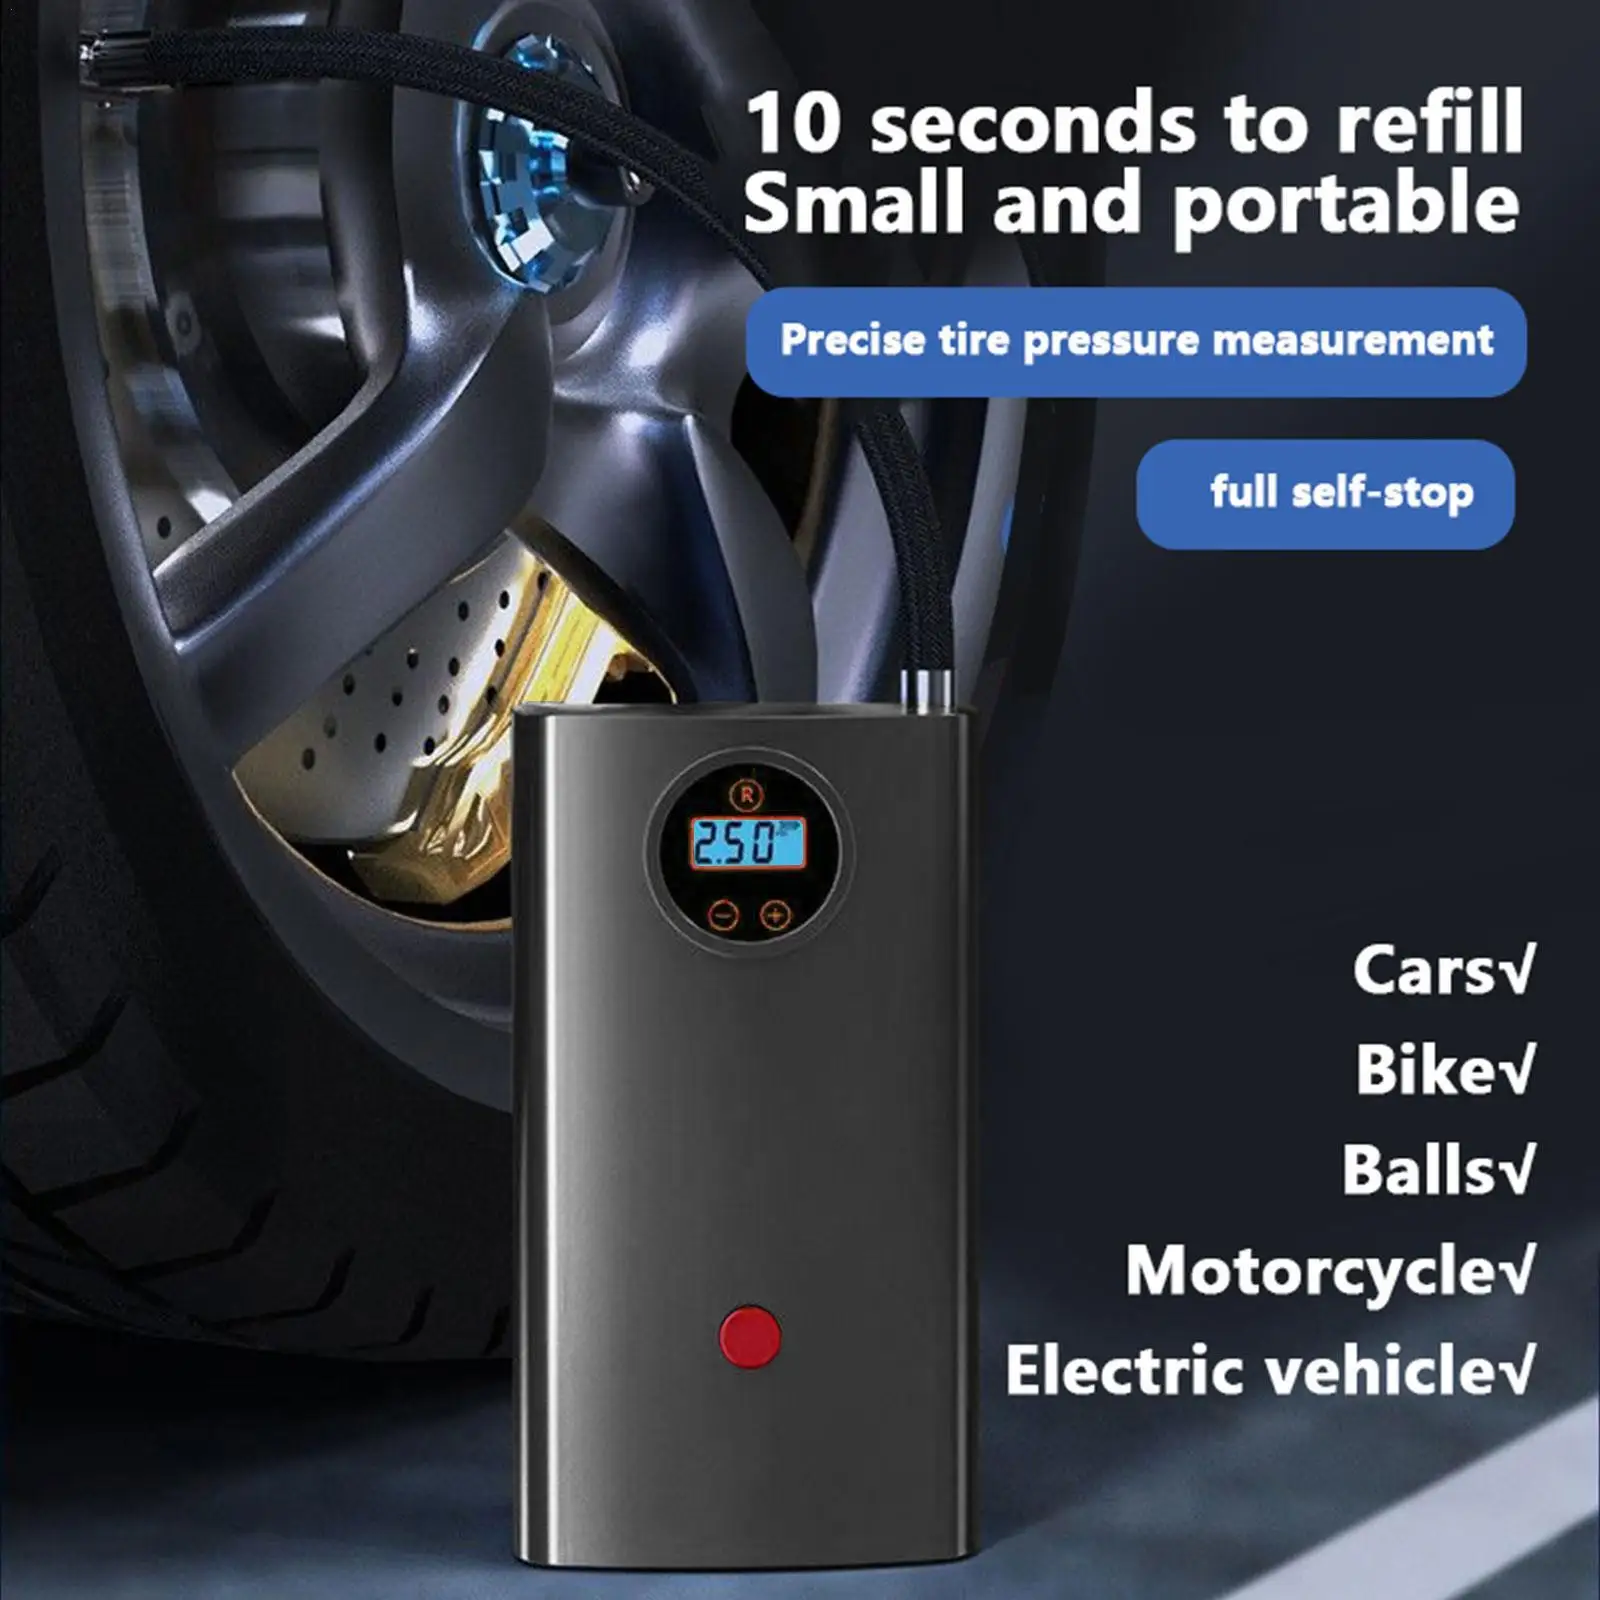 12V Portable Car Air Compressor 8000mAh Wireless Tyre Inflator Bicycle Pump Inflatable Air Conditioner Pump Air Injector Auto